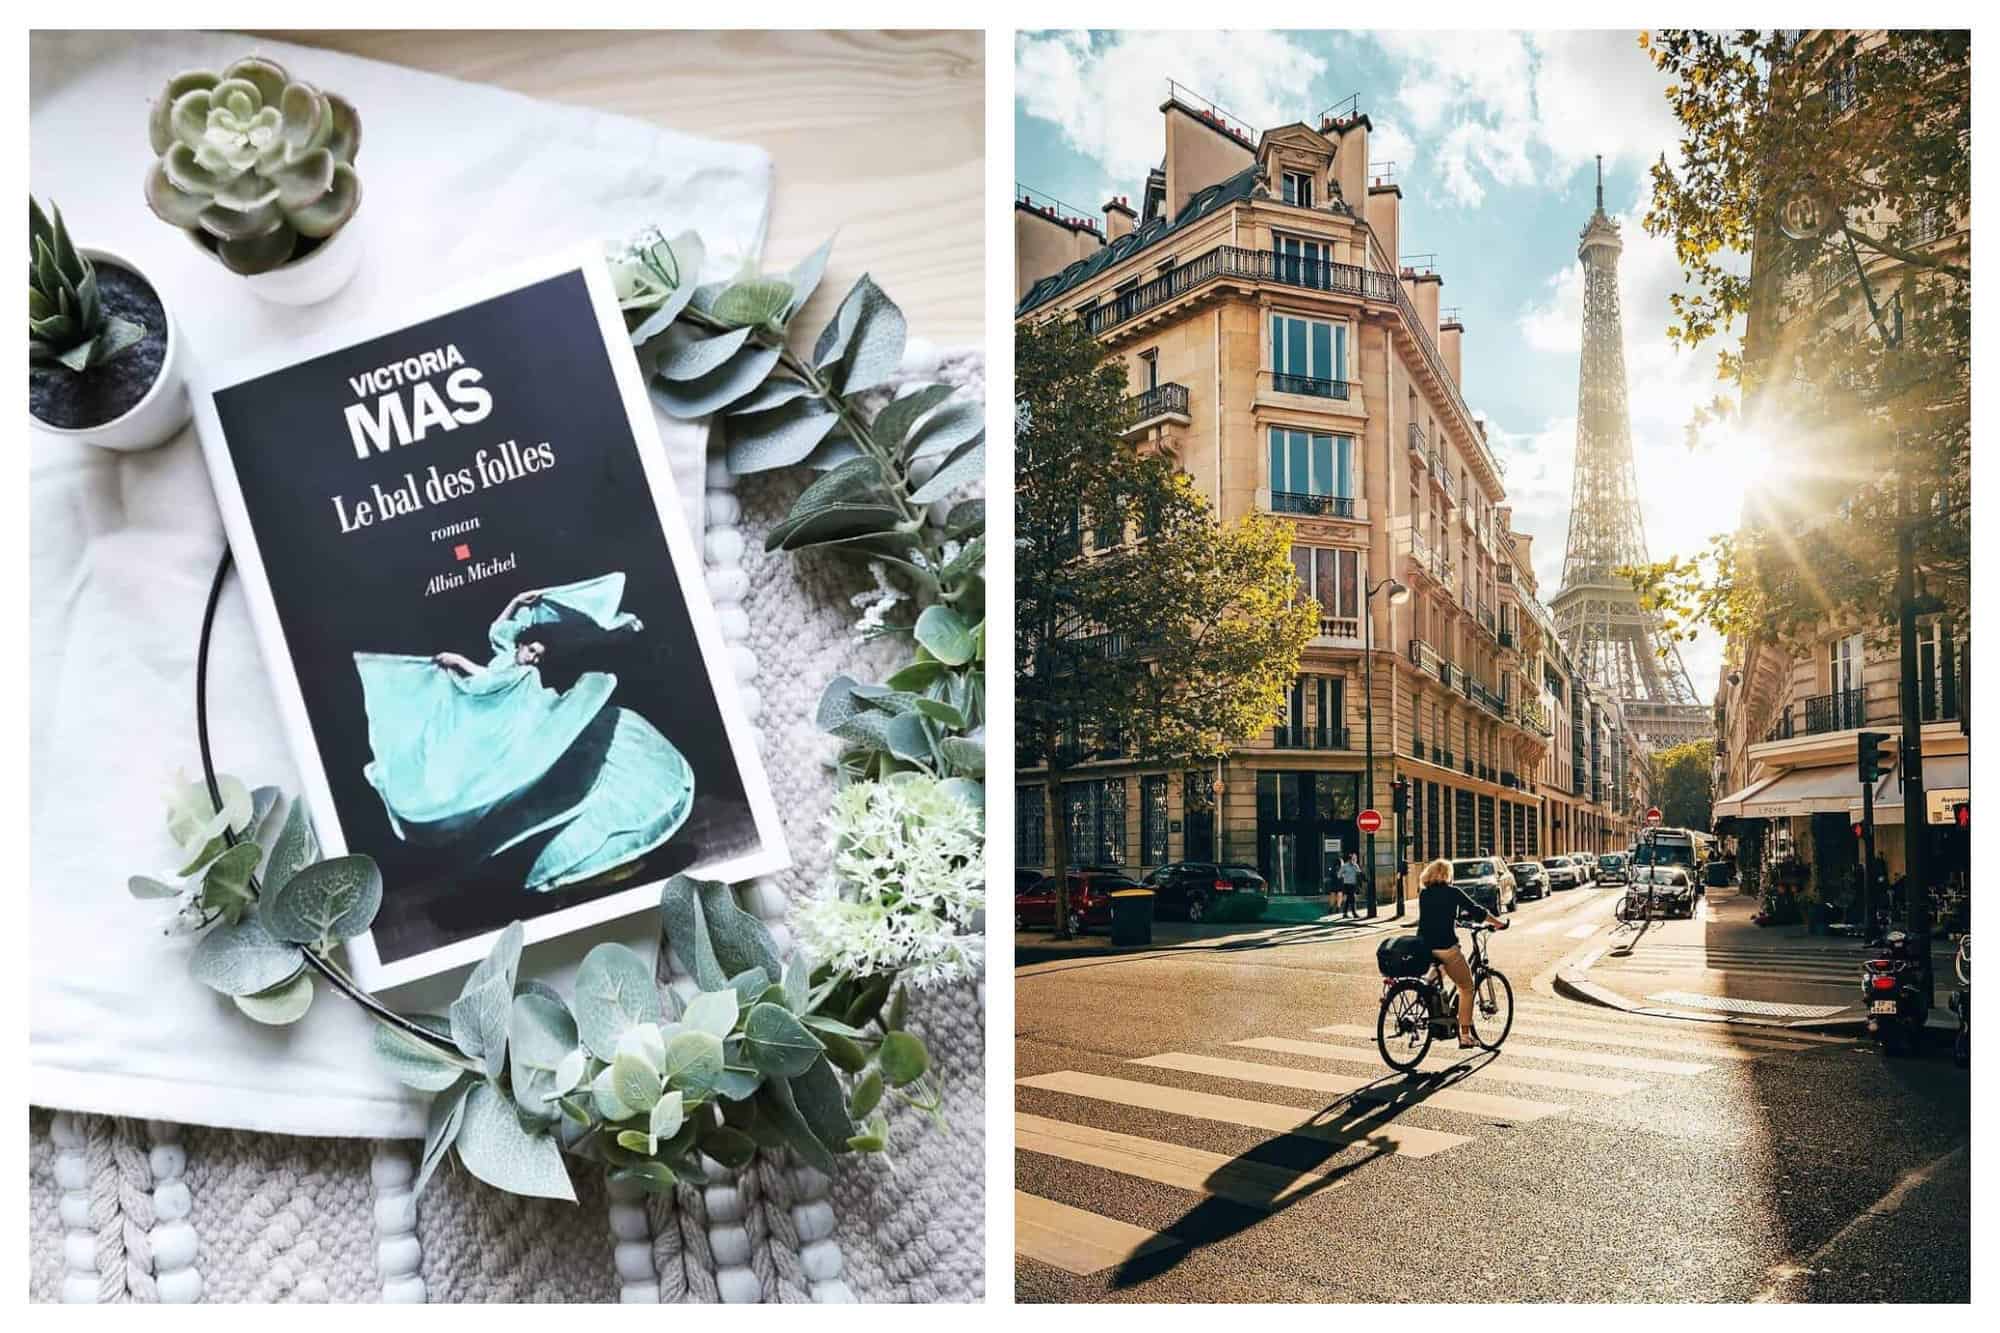 Left: The book "Le bal des folles" by french author Victoria Mas is lying in a piece of white cloth and a gray knit. A circular arrangement of eucalyptus leaves and flowers surrounds the book. There are also 2 small pots of beautiful cacti. Right: A woman on a bicycle is pictures crossing the street towards the Eiffel Tower. The sun shines behind the Eiffel Tower giving an amazing light to the street and the cycler. Her shadow was perfectly captured in this photo.